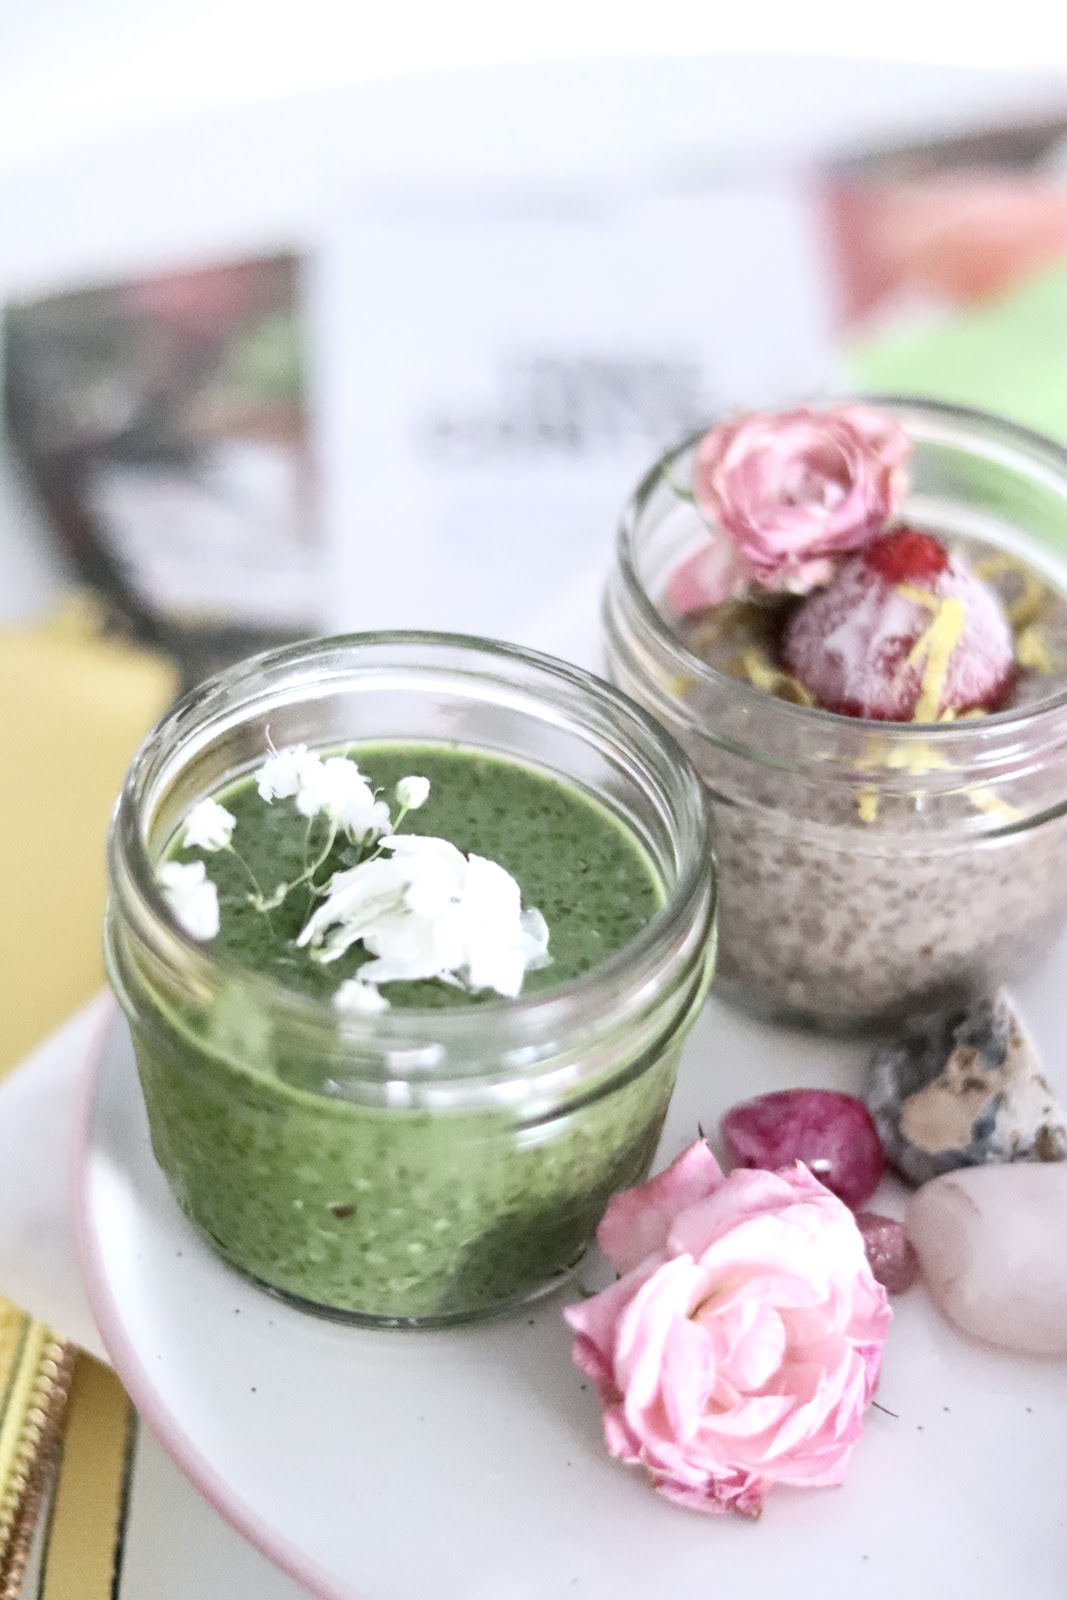 Pastels and Pastries, gab Pacifico, breakfast, healthy, vegan, chia pudding, matcha chia, vital proteins, beauty boosting collage chia pudding